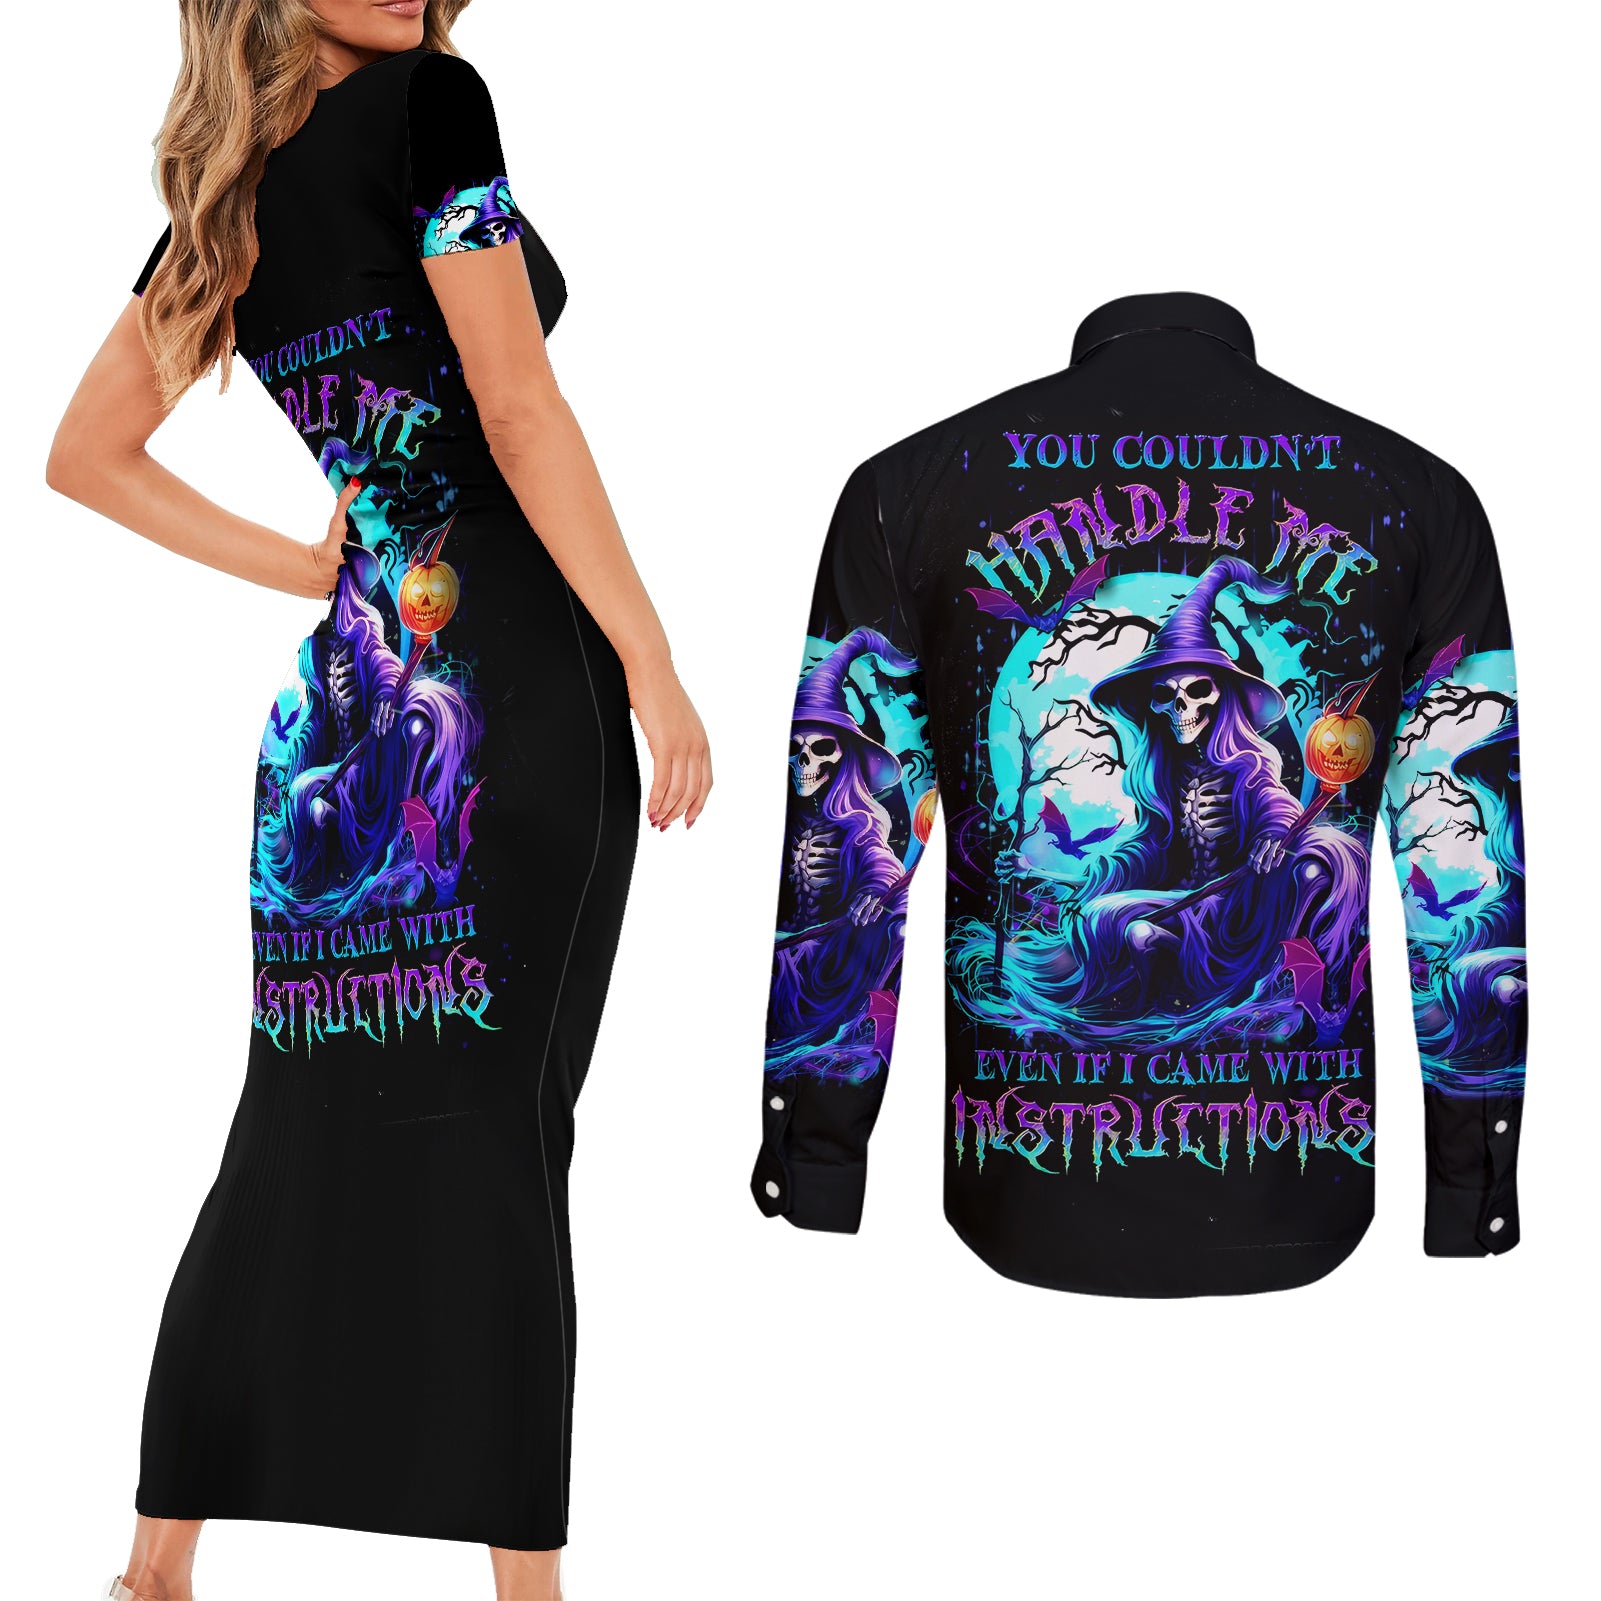 witch-skull-couples-matching-short-sleeve-bodycon-dress-and-long-sleeve-button-shirts-you-couldnt-handle-me-even-with-intrustions